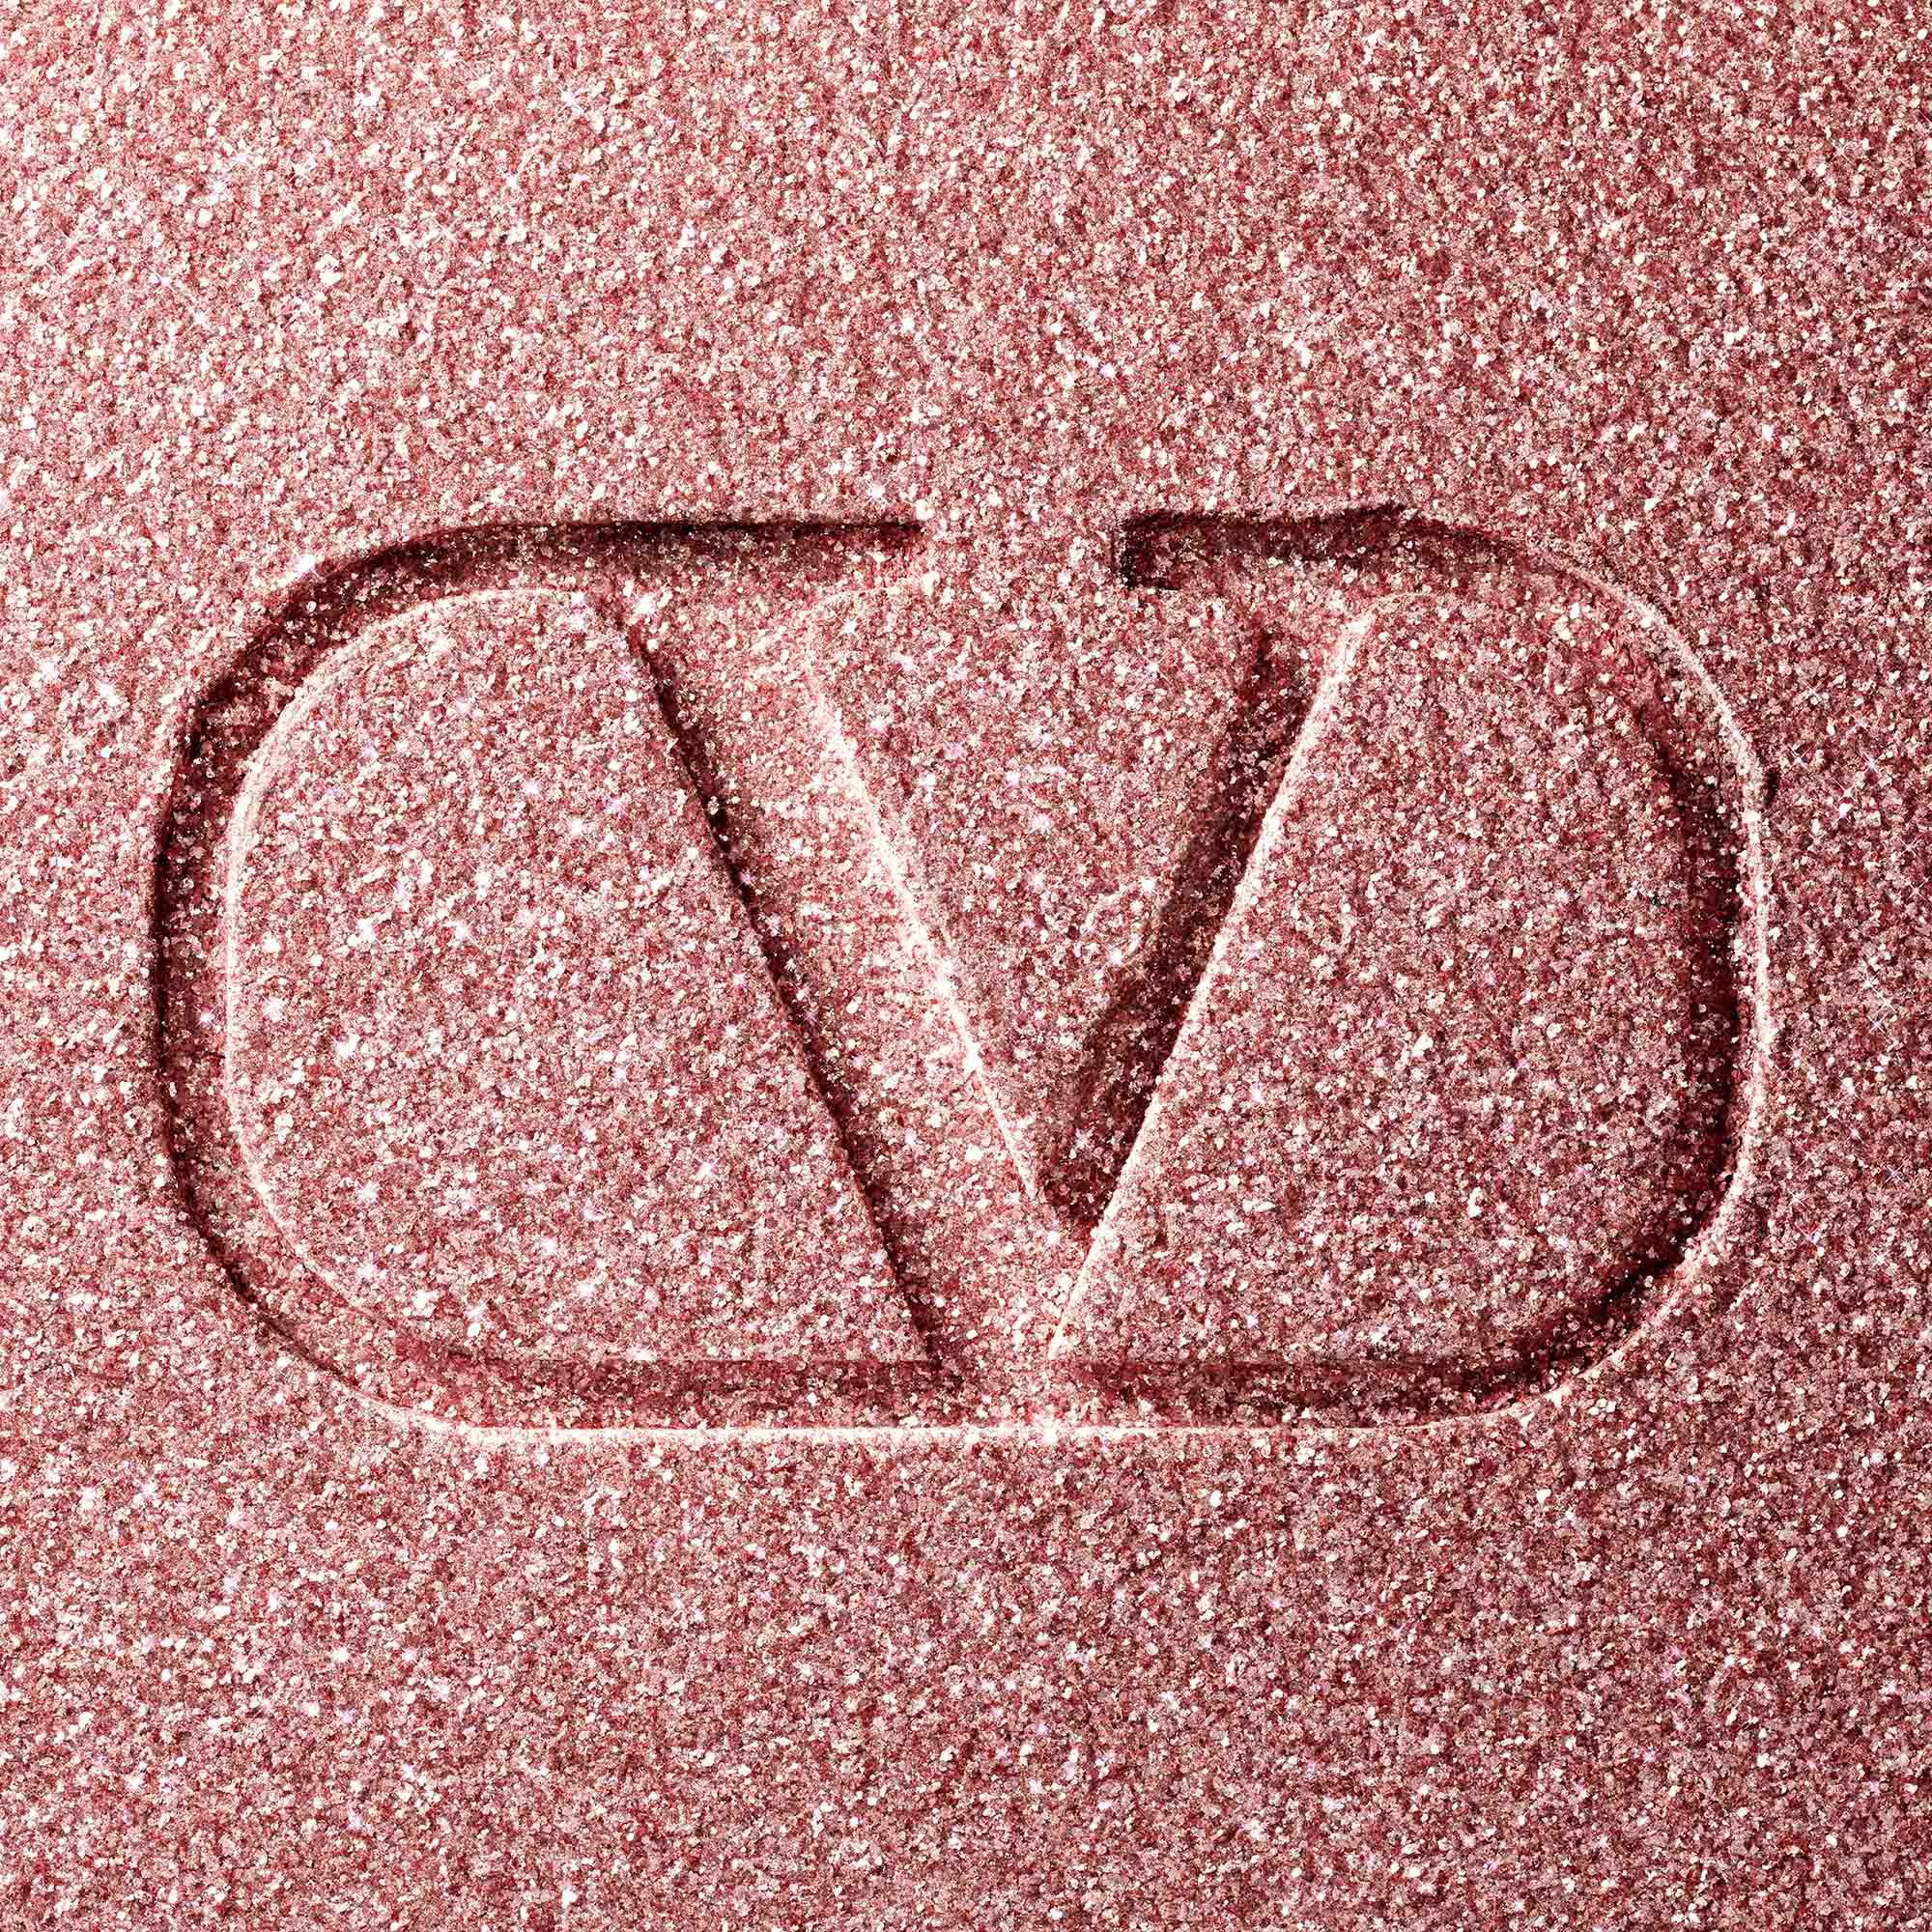 Valentino-Dreamdust-Loose-Shimmer-1-3614273230810-Texture2